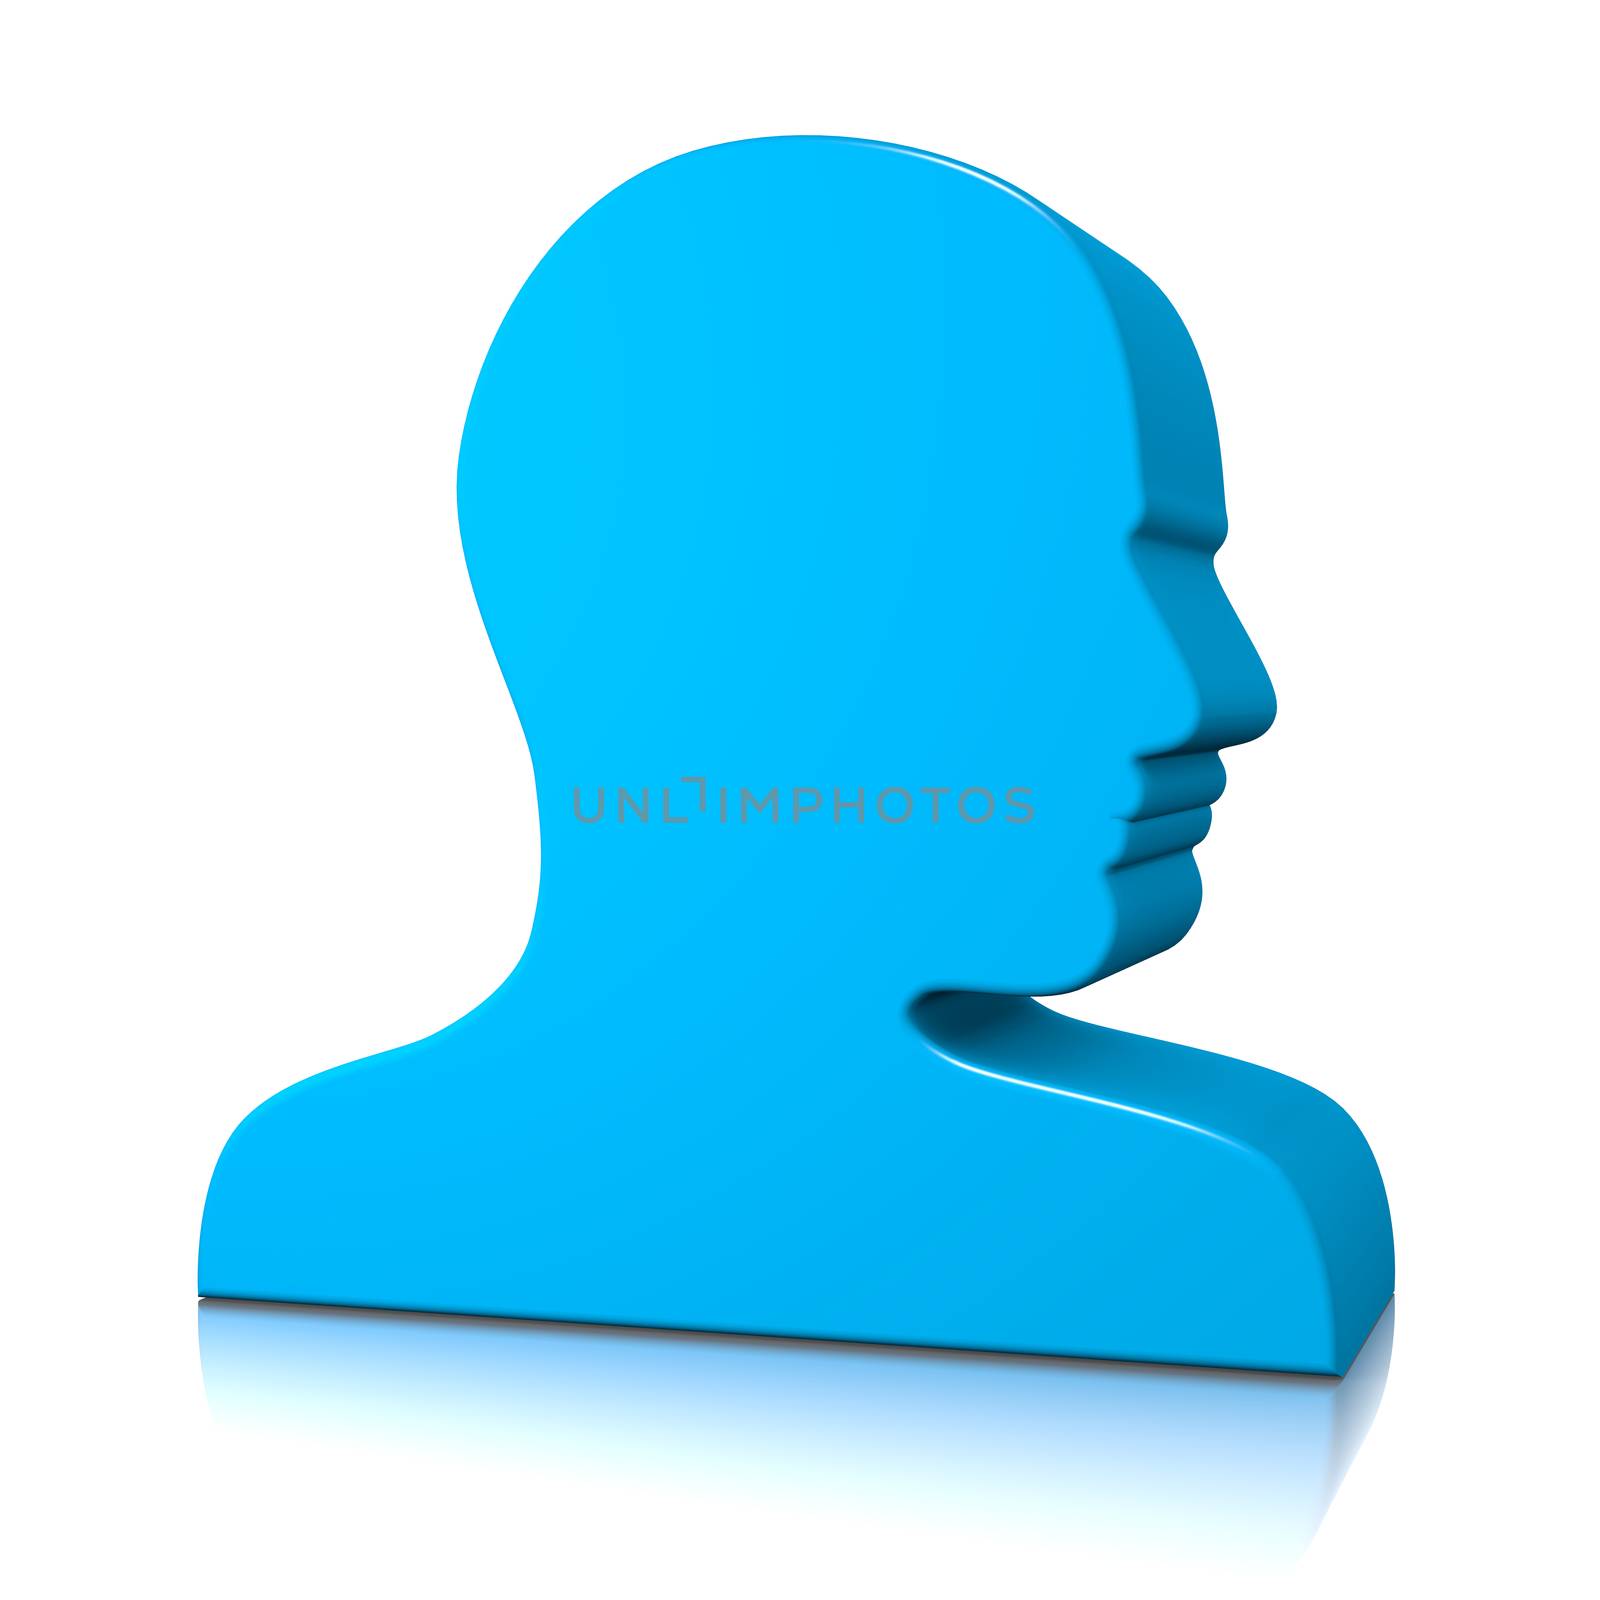 Blue Man Head Profile 3D Silhouette on White Background with Reflection